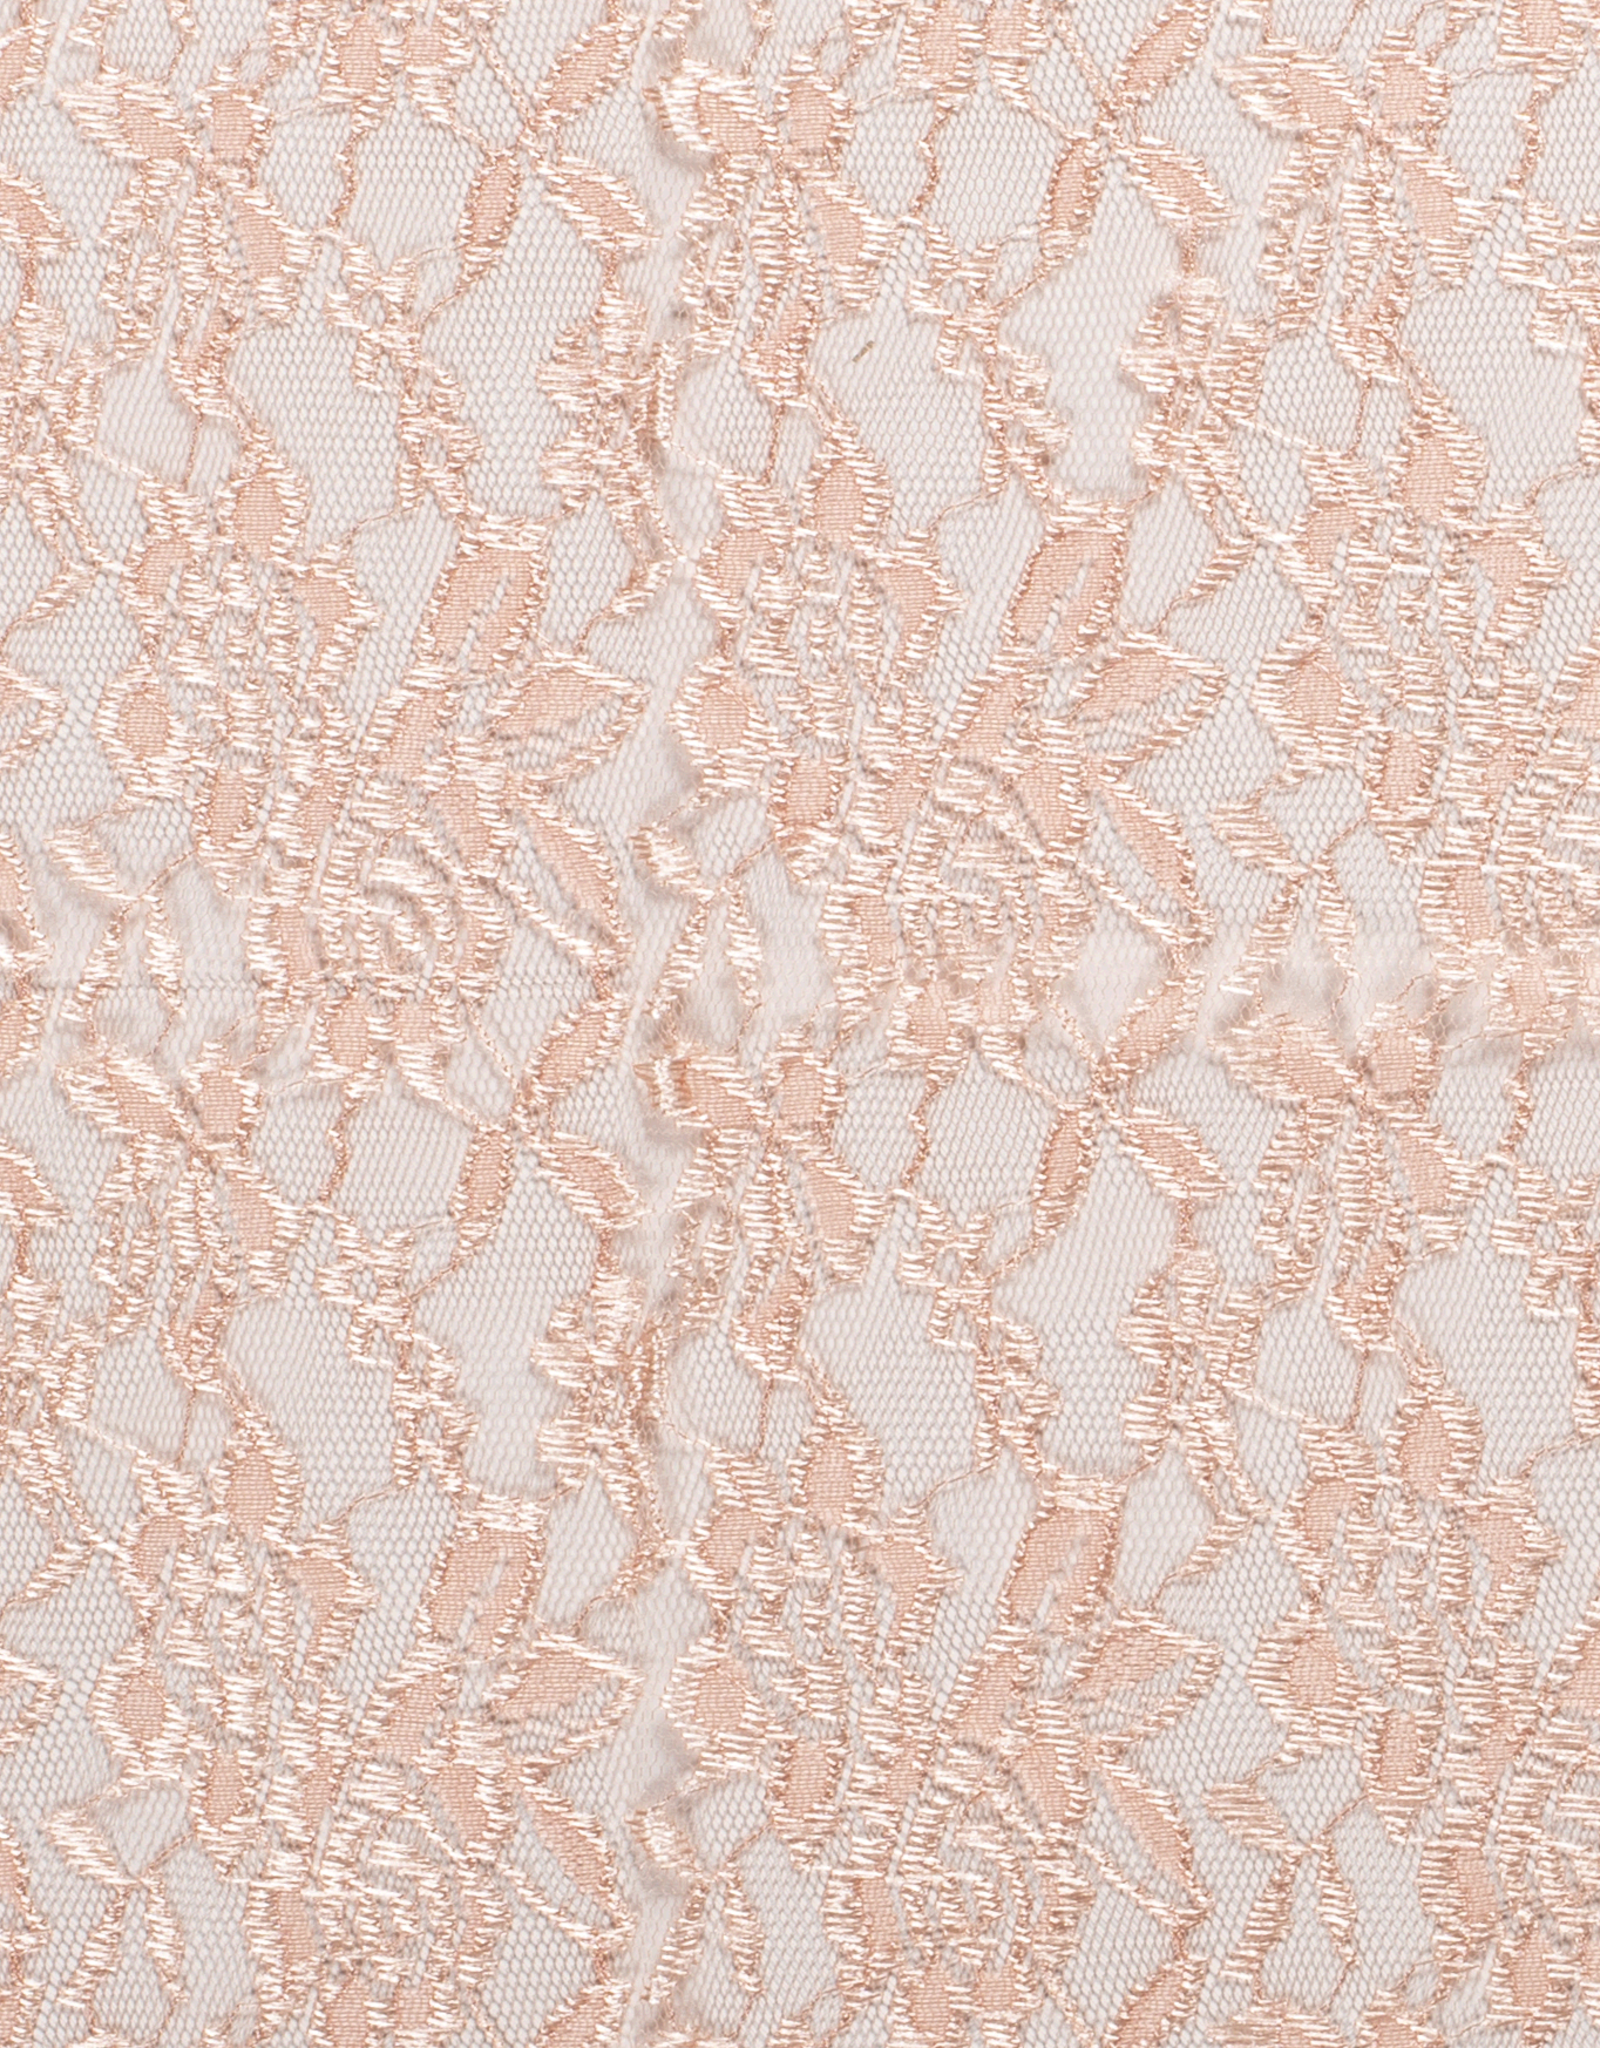 Nooteboom Kant lace flowers zalm